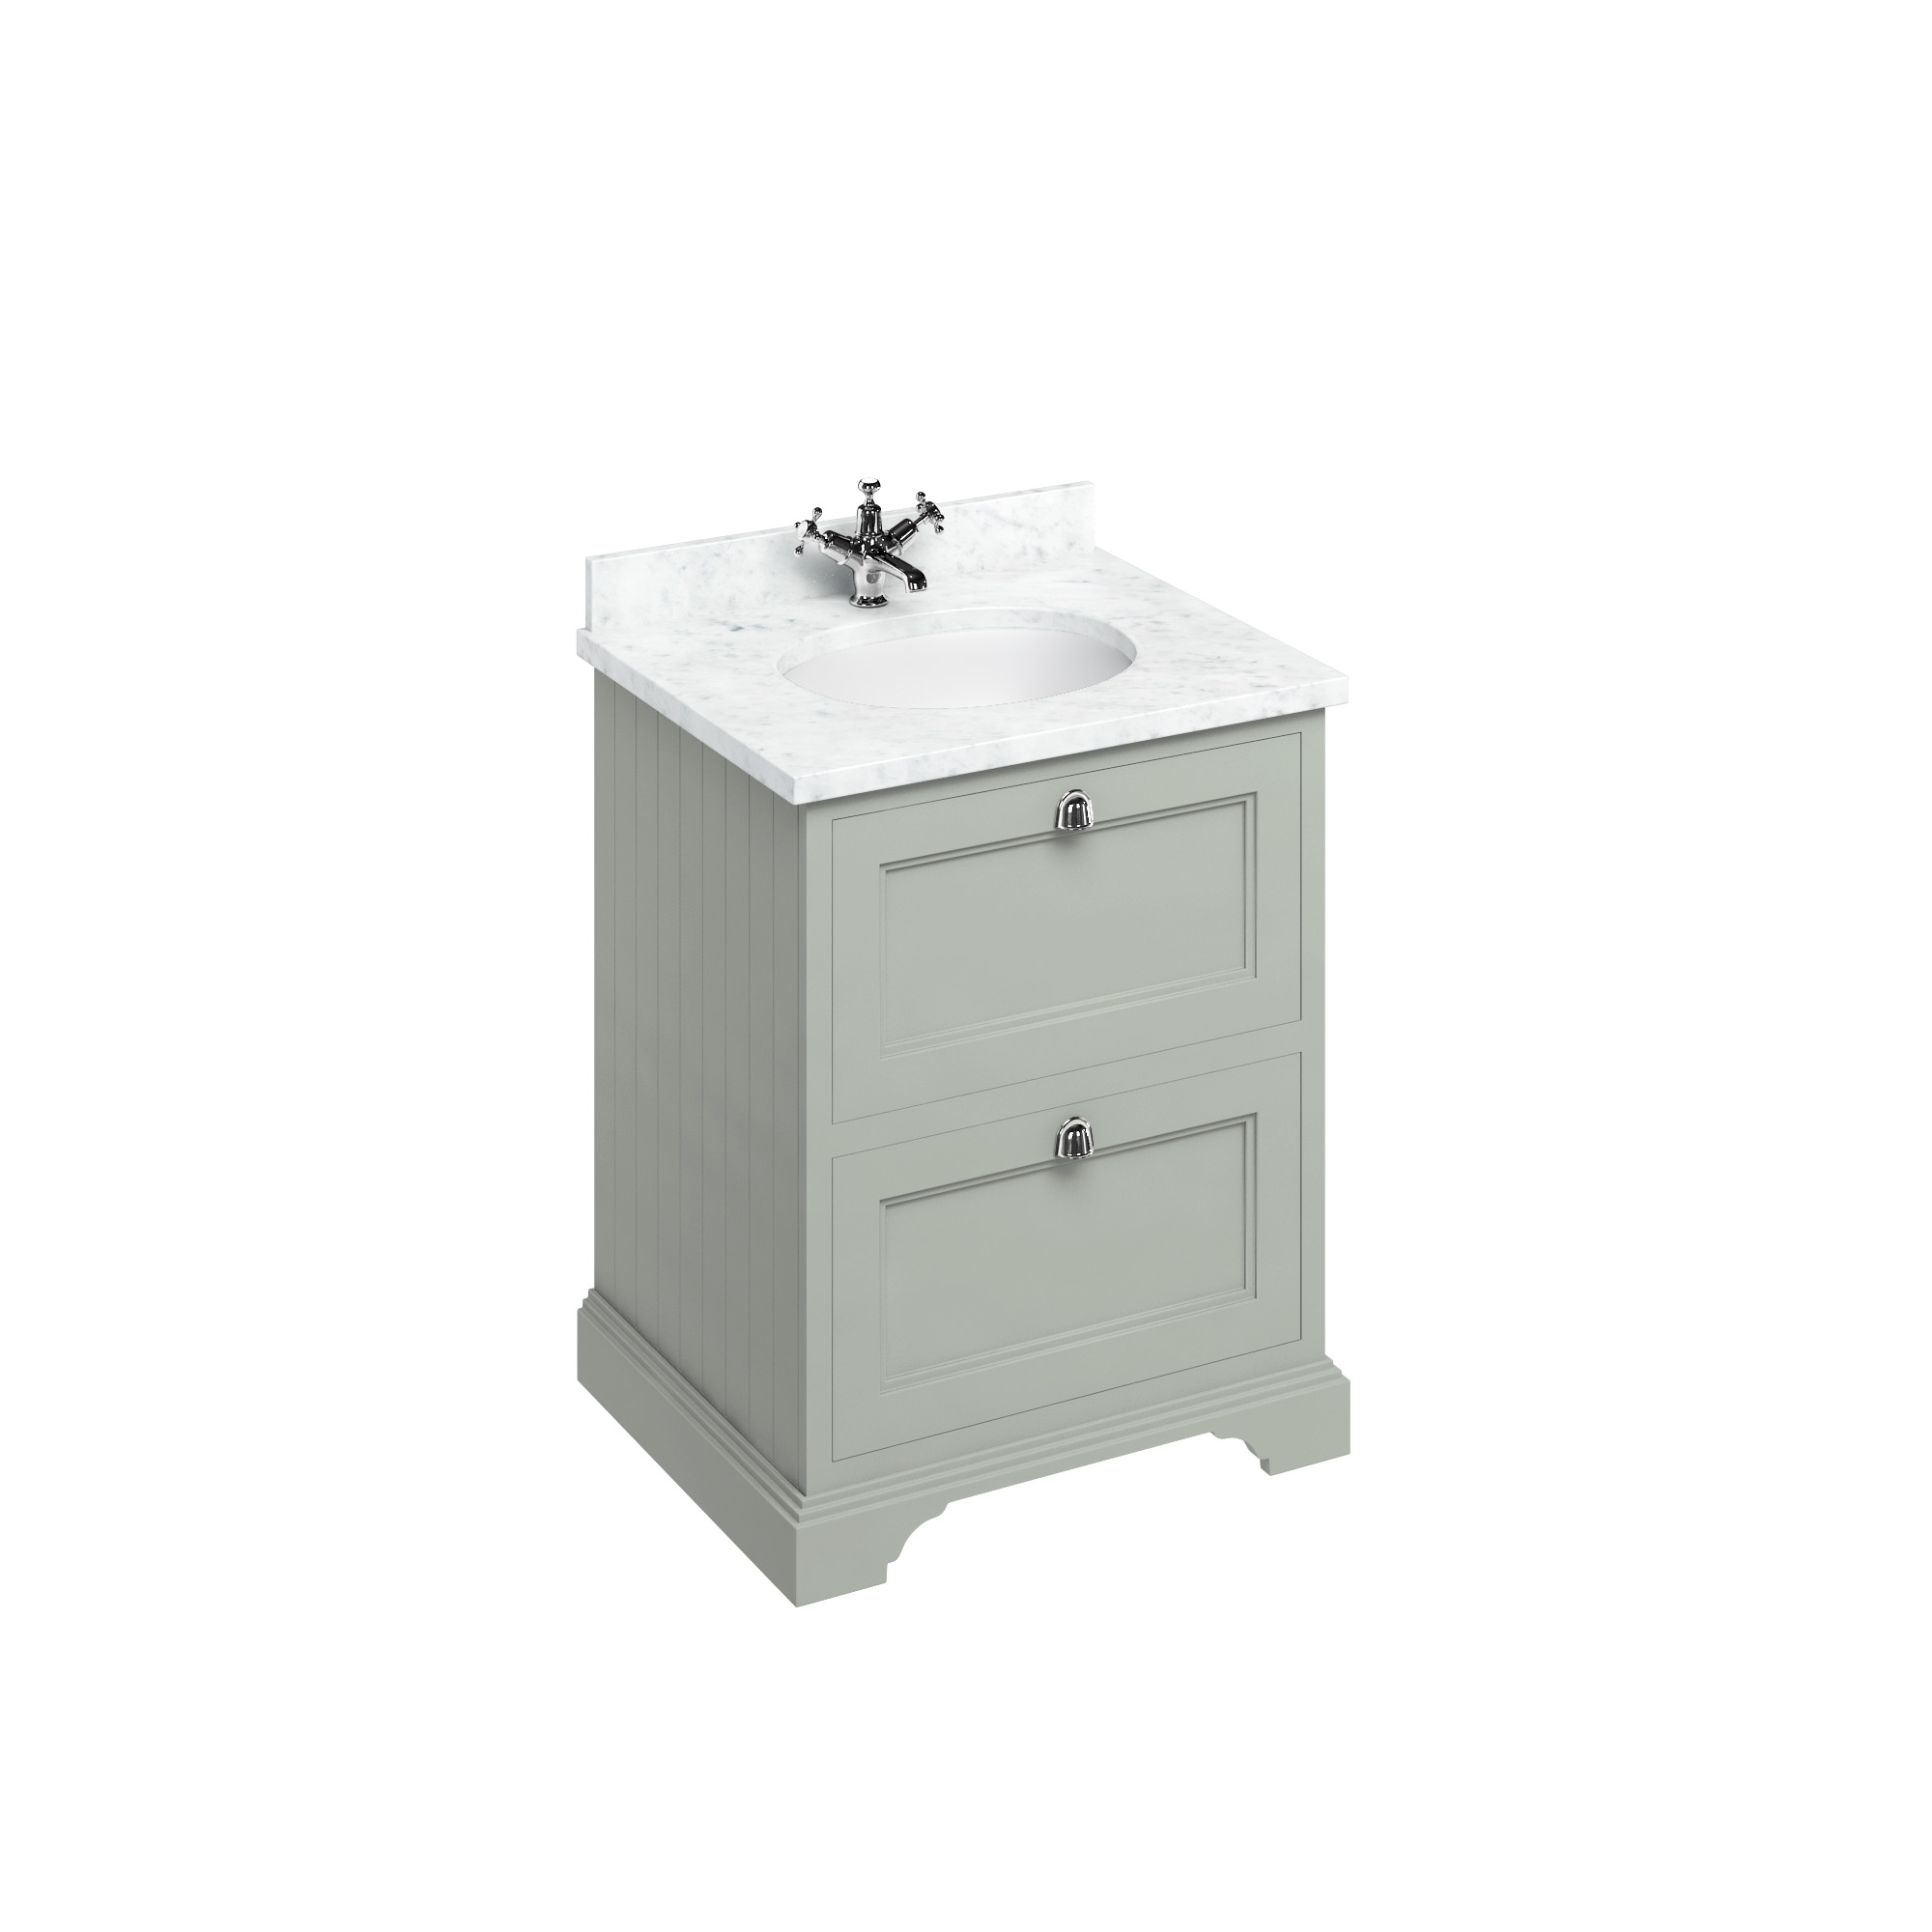 Freestanding 65 Vanity Unit with 2 drawers - Dark Olive and Minerva Carrara white worktop with integrated white basin